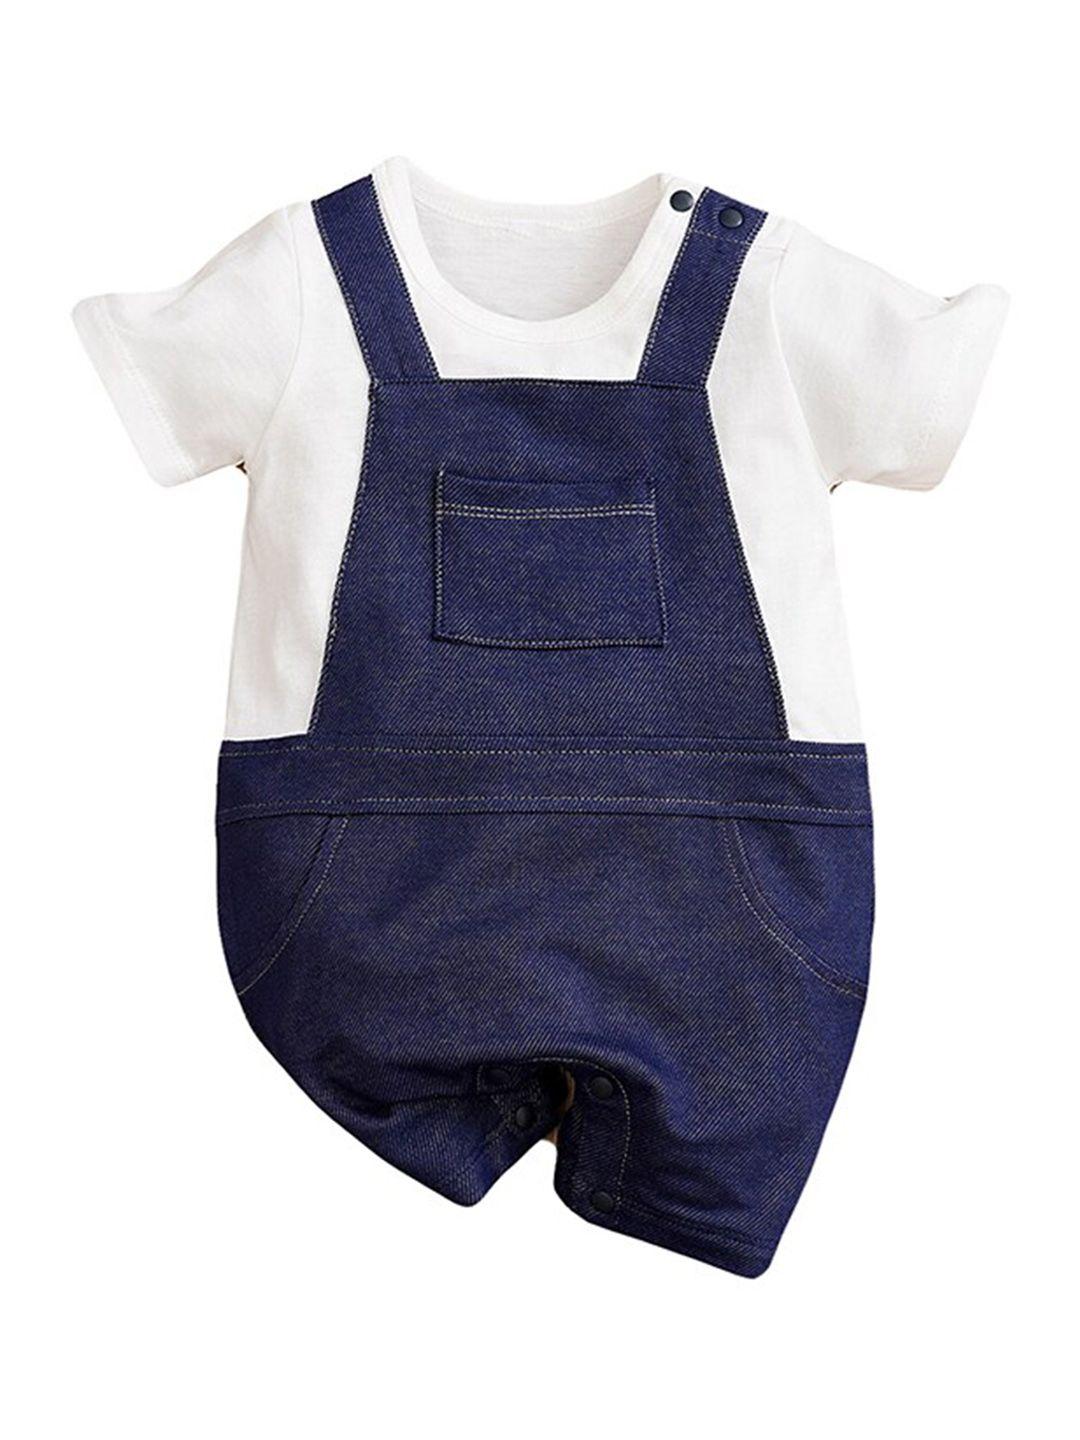 stylecast infant blue & white cotton rompers